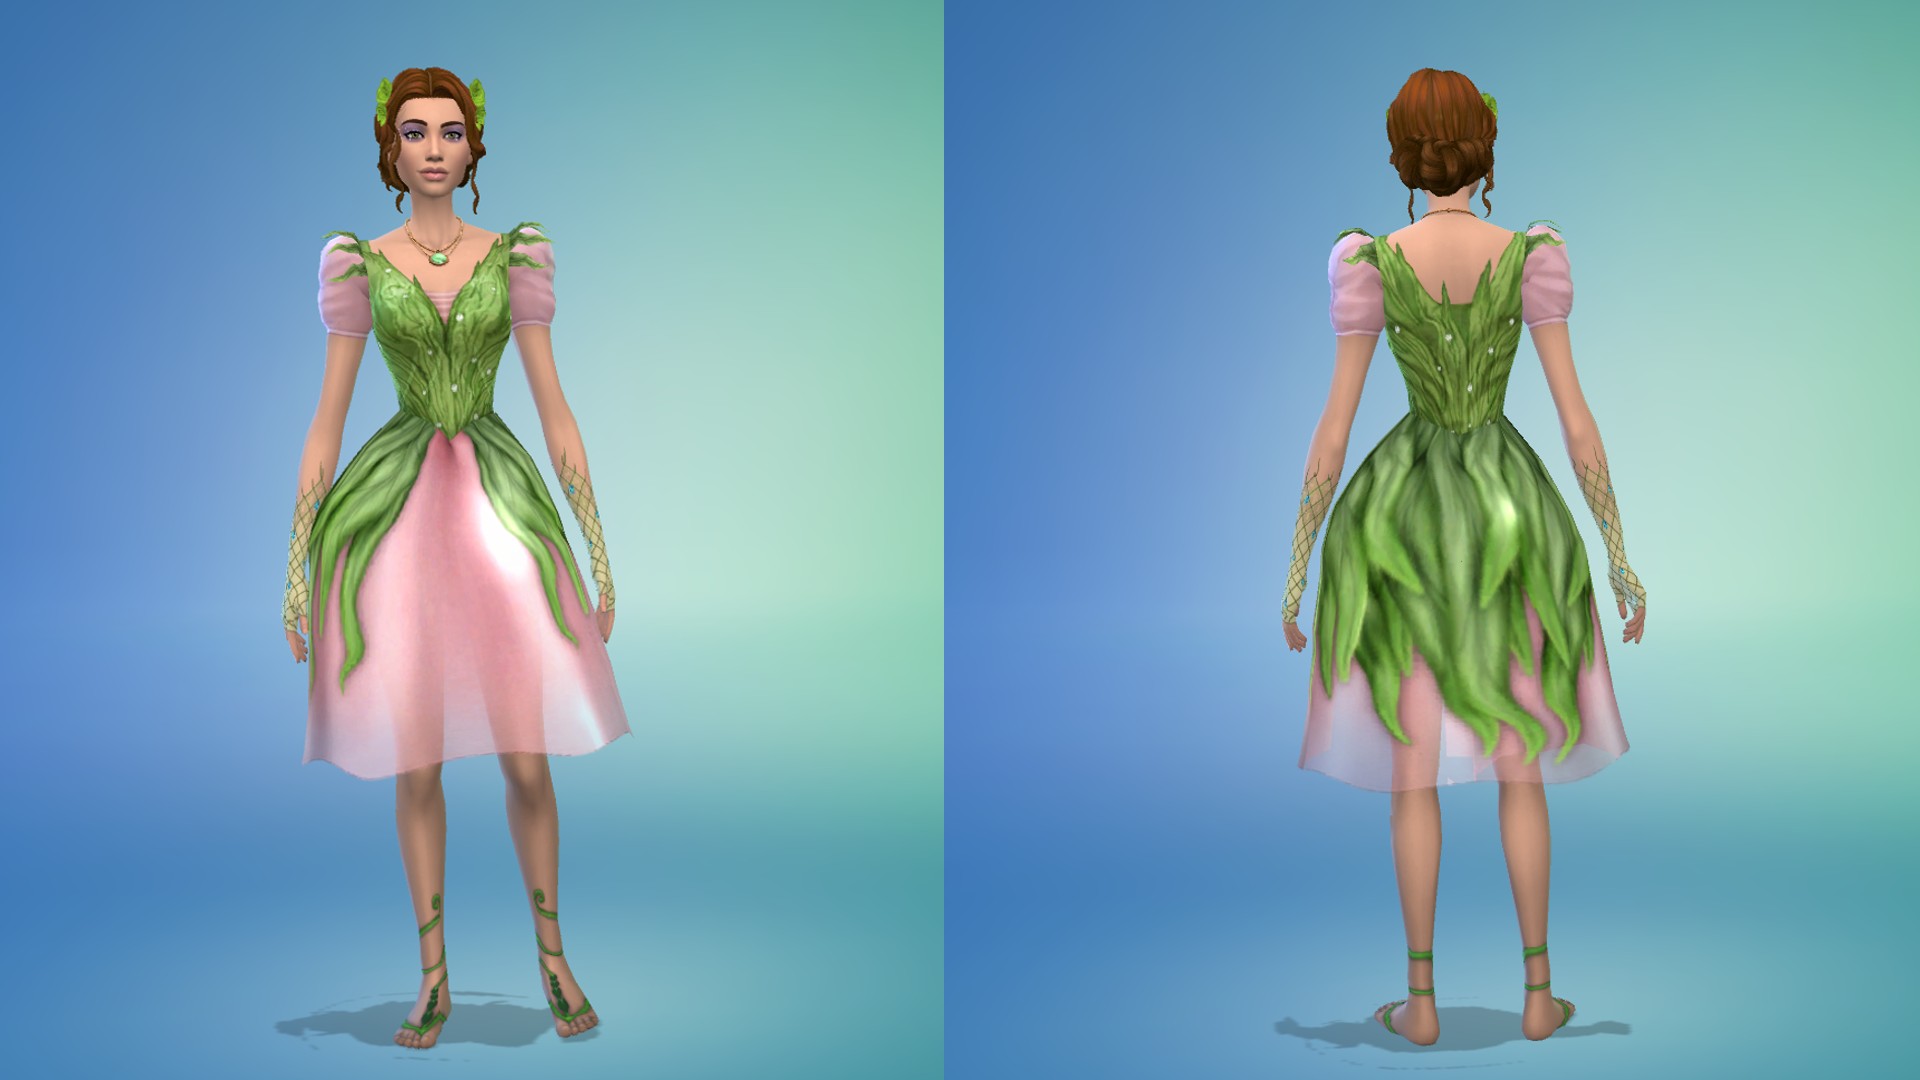 The Sims 4 Cottage Fae Dress Mod